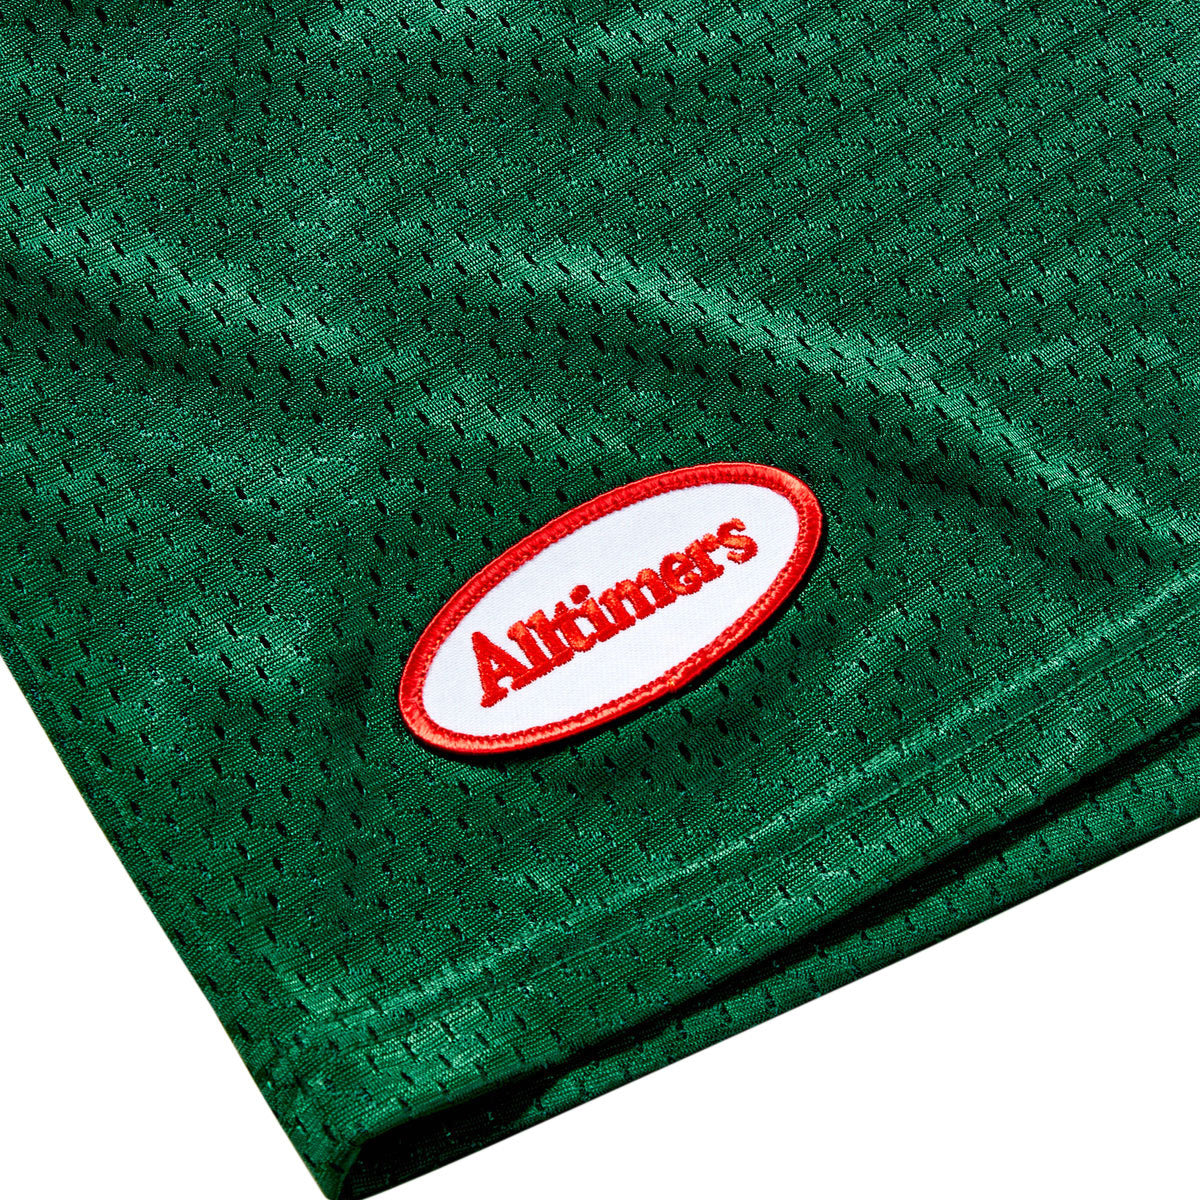 Alltimers Tankful Patch Champion Shorts - Forest Green image 2